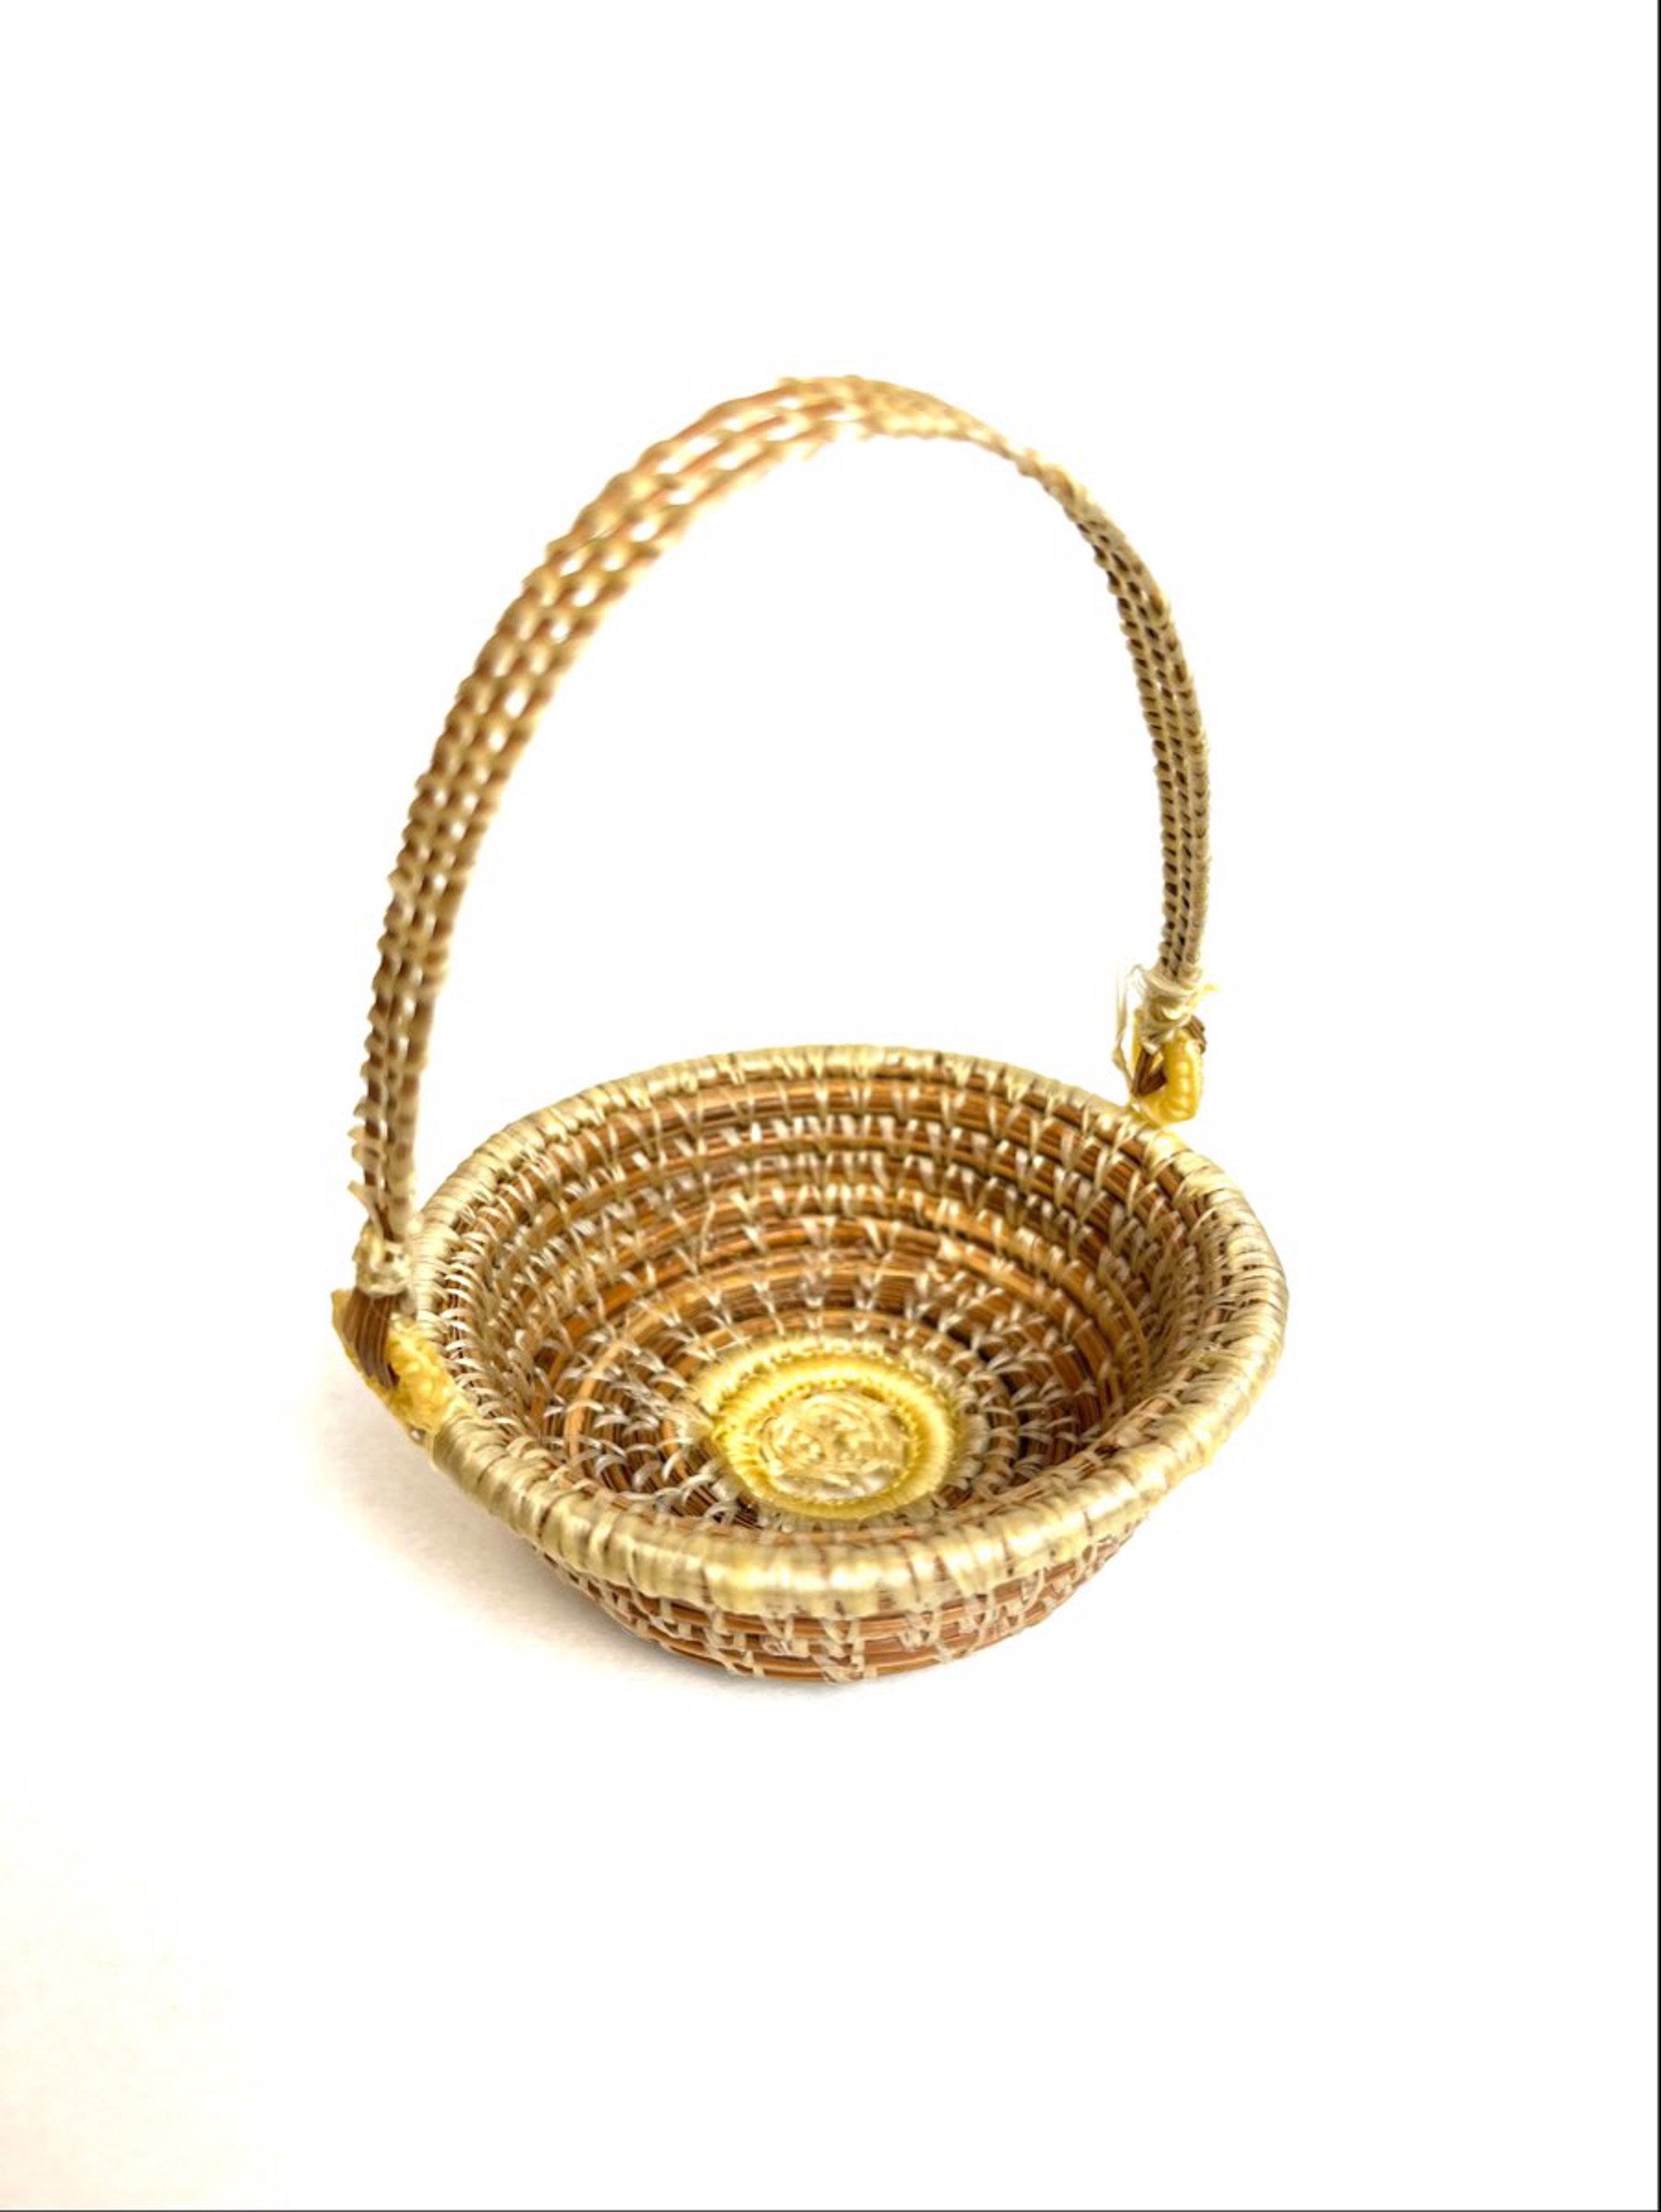 Basket with Web Design and Woven Handle by Jacqueline Green